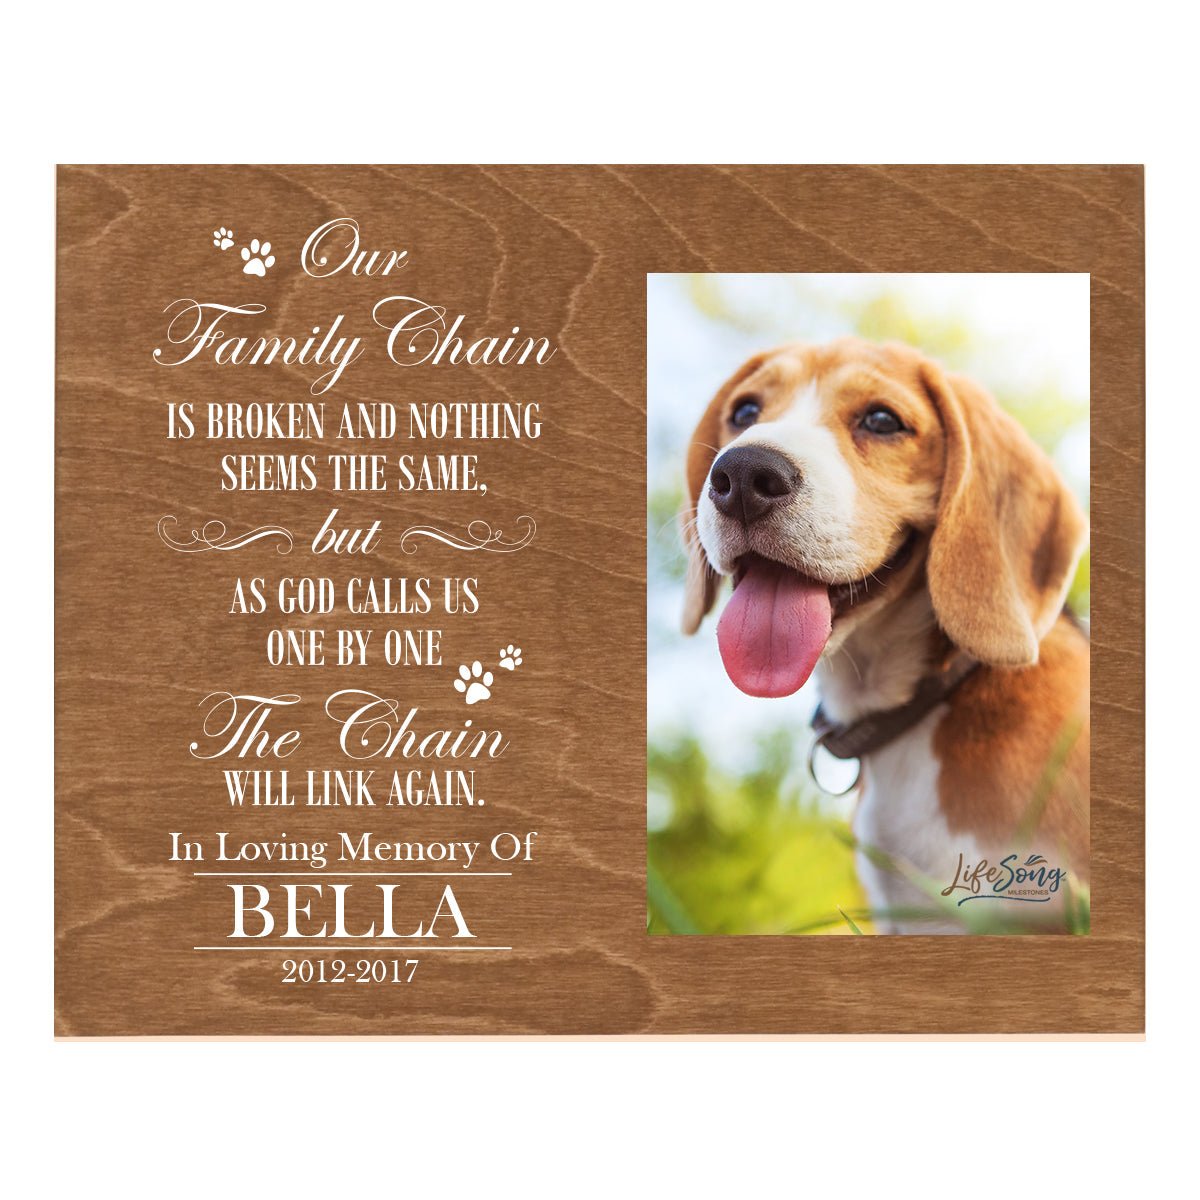 Pet Memorial Photo Wall Plaque Décor - Our Family Chain Is Broken - LifeSong Milestones